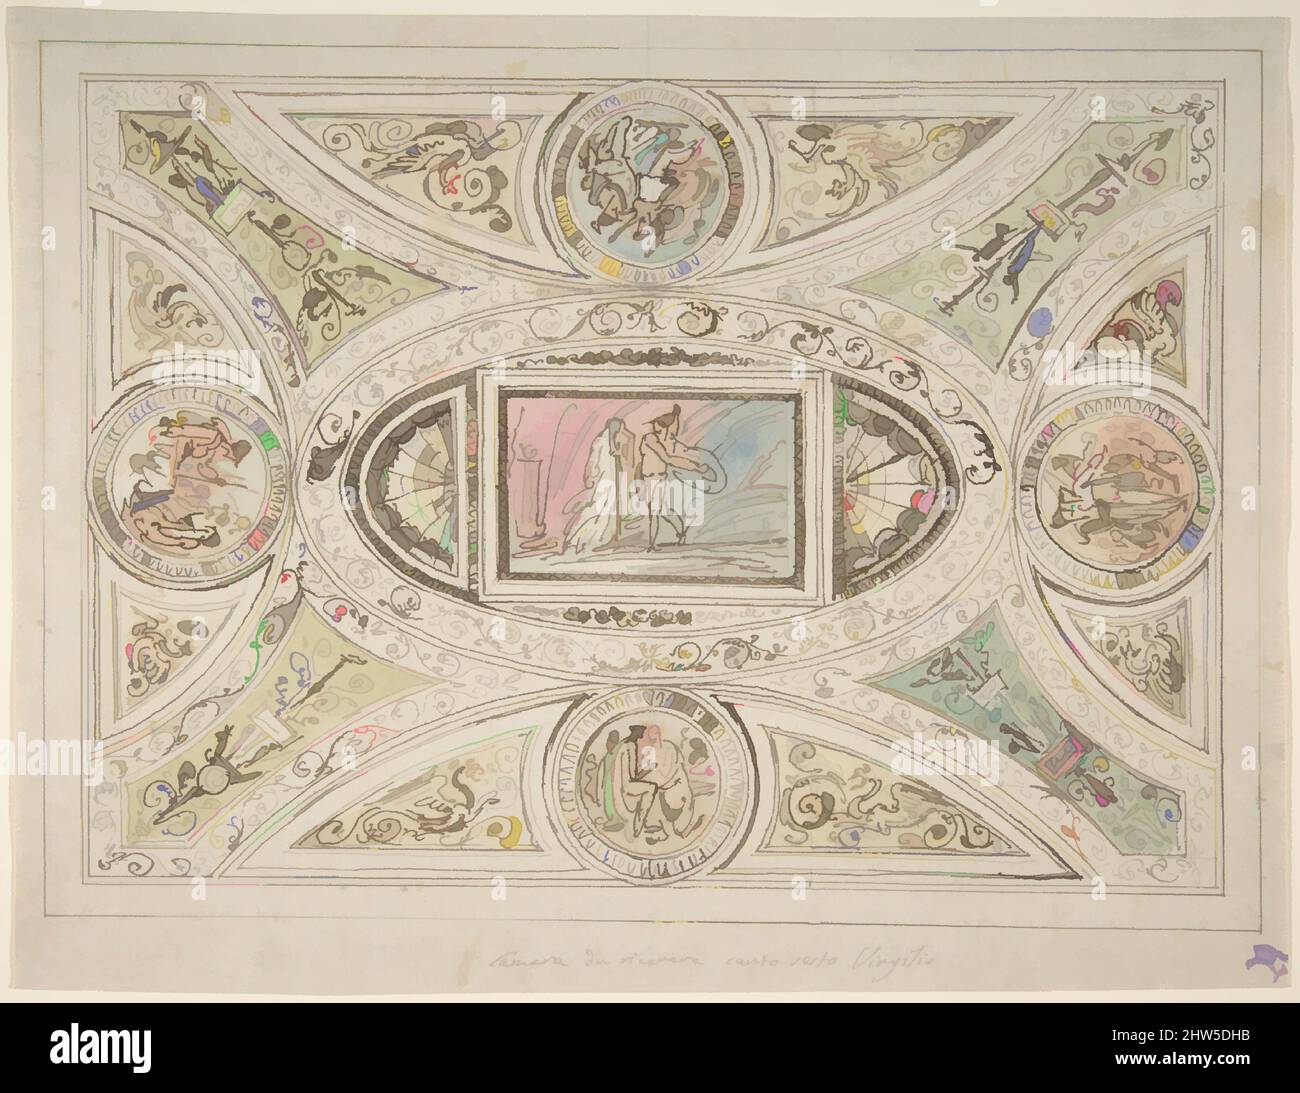 Art inspired by Design for a Ceiling with Decoration Related to Virgil's Sixth Canto, 1758–1823, Pen and brown ink, brush and yellow, pink, blue and green wash over traces of leadpoint; vertical line in leadpoint through thr center to create the symmetry of the drawing and to other, Classic works modernized by Artotop with a splash of modernity. Shapes, color and value, eye-catching visual impact on art. Emotions through freedom of artworks in a contemporary way. A timeless message pursuing a wildly creative new direction. Artists turning to the digital medium and creating the Artotop NFT Stock Photo